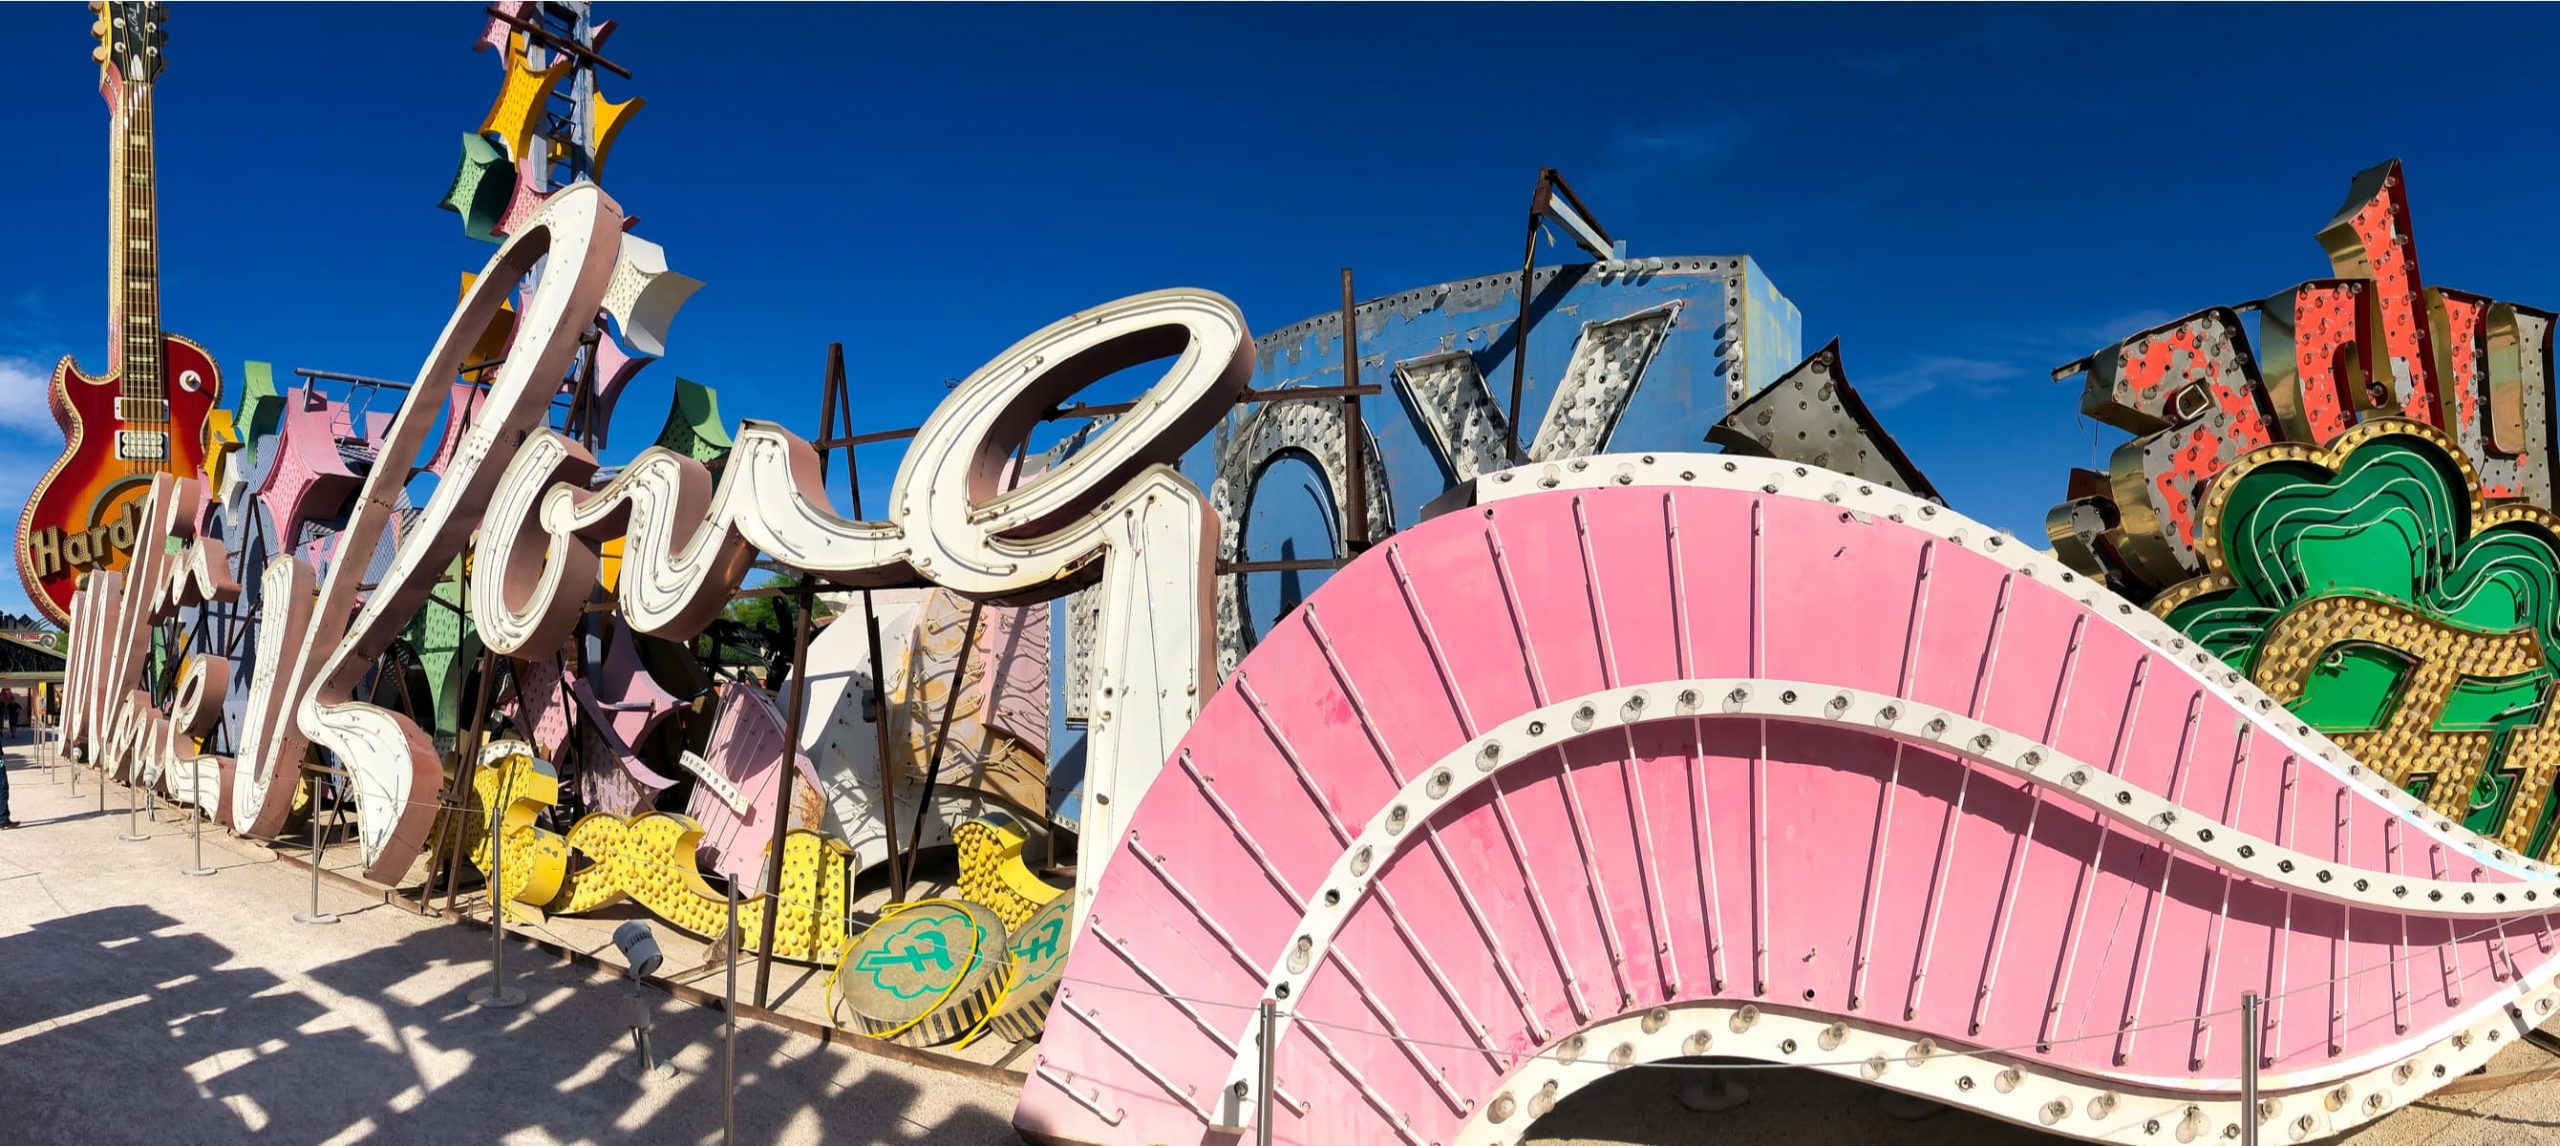 The Neon Museum, a collection of neon old signs on a beautiful sunny day. Panoramic view.